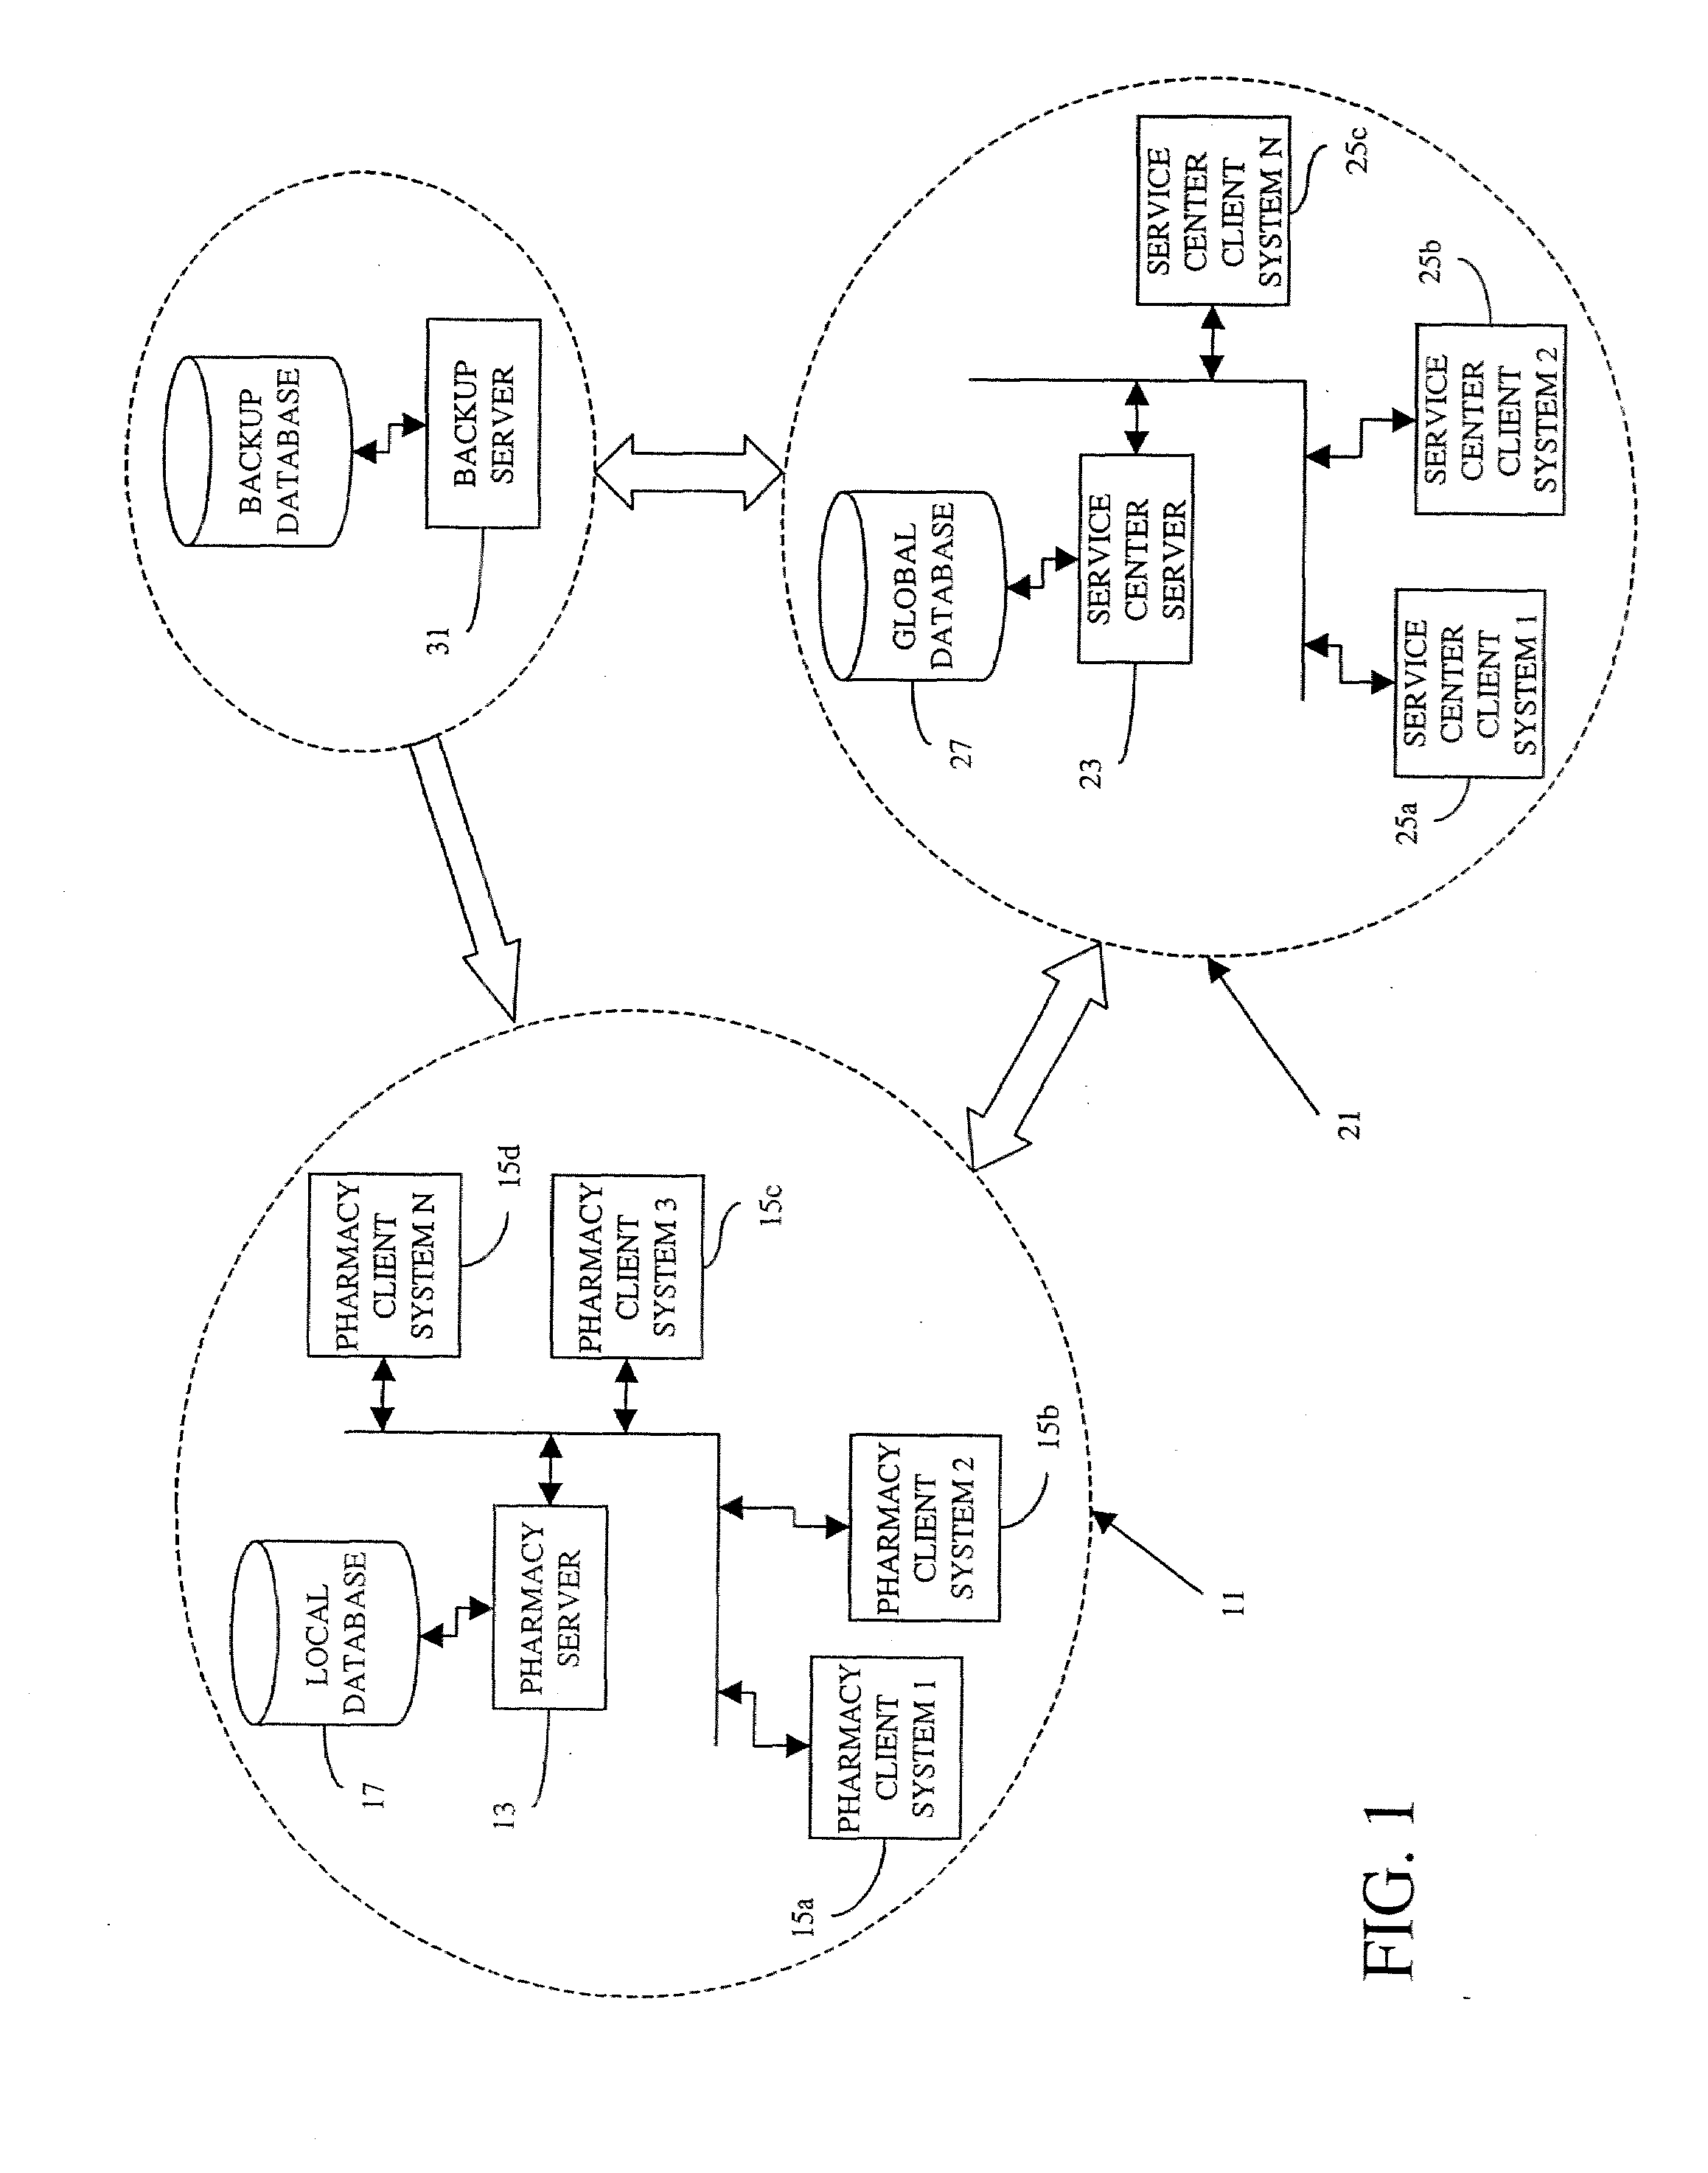 System and method for pharmacy administration